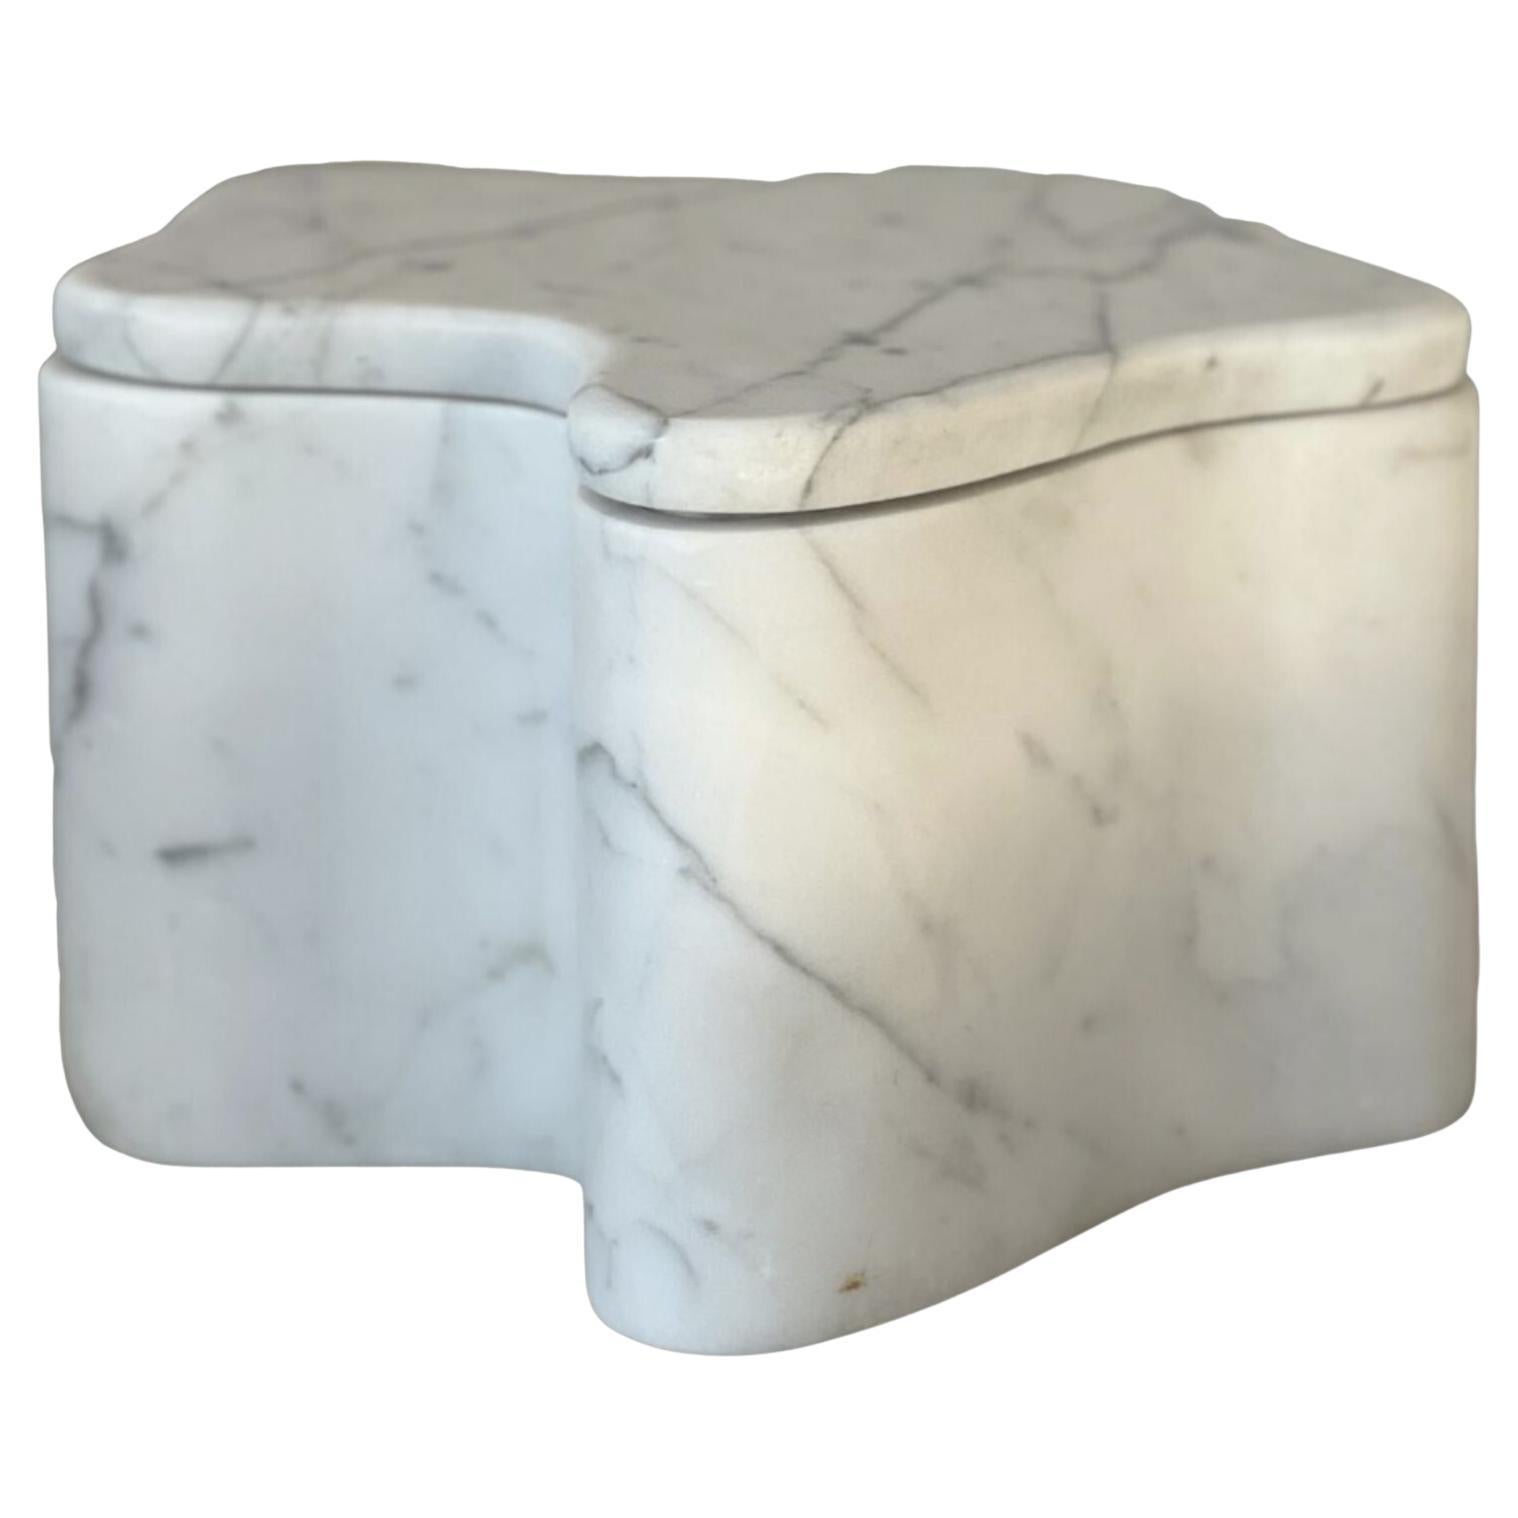 Flo Box: Organic Lidded Box in Cloud Marble by Anastasio Home For Sale